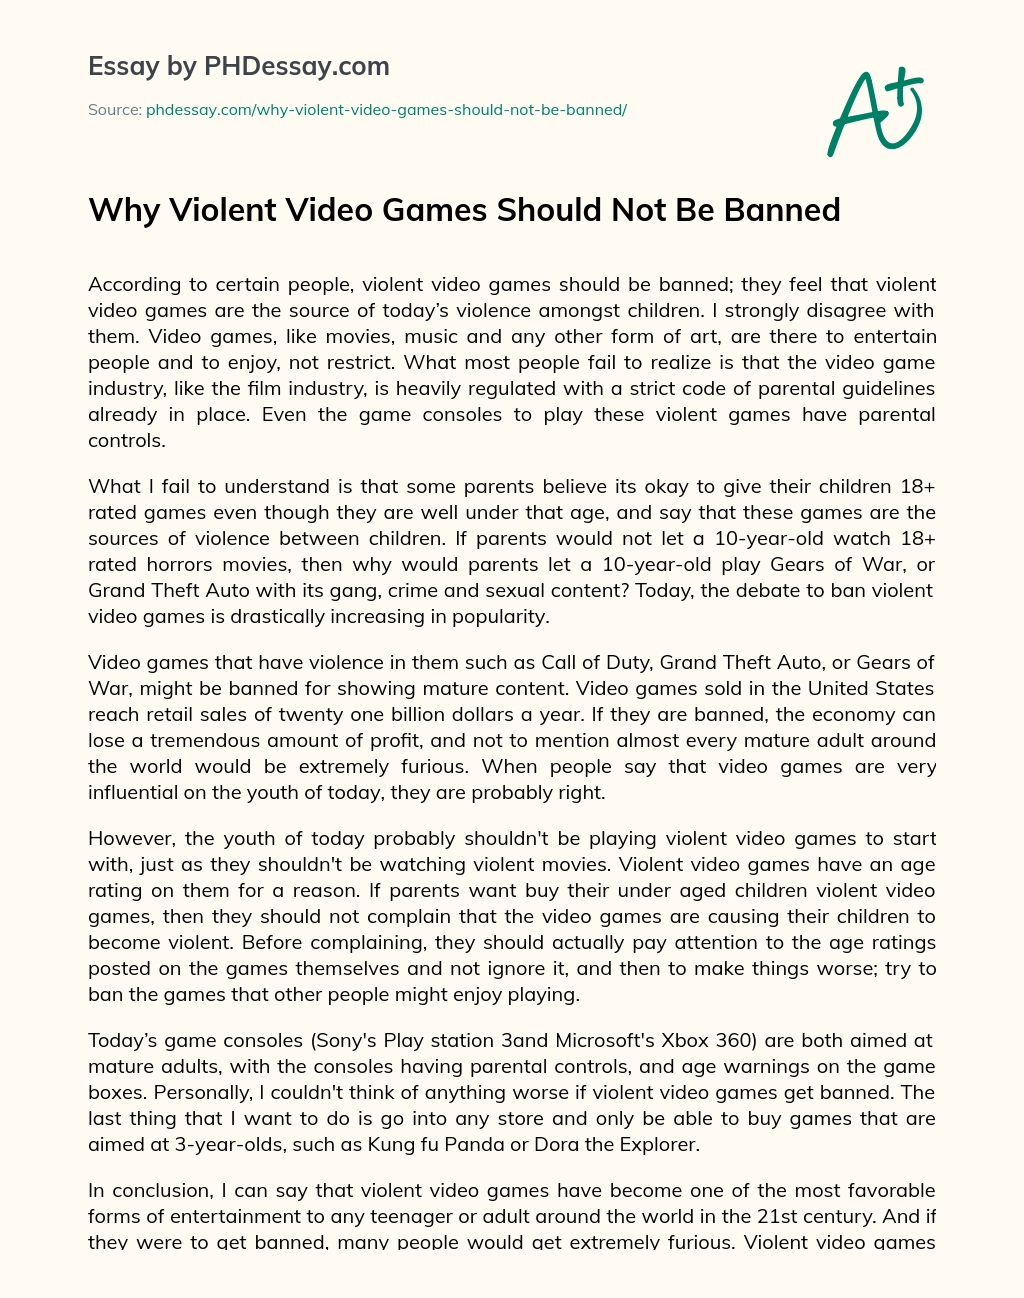 Why Violent Video Games Should Not Be Banned essay